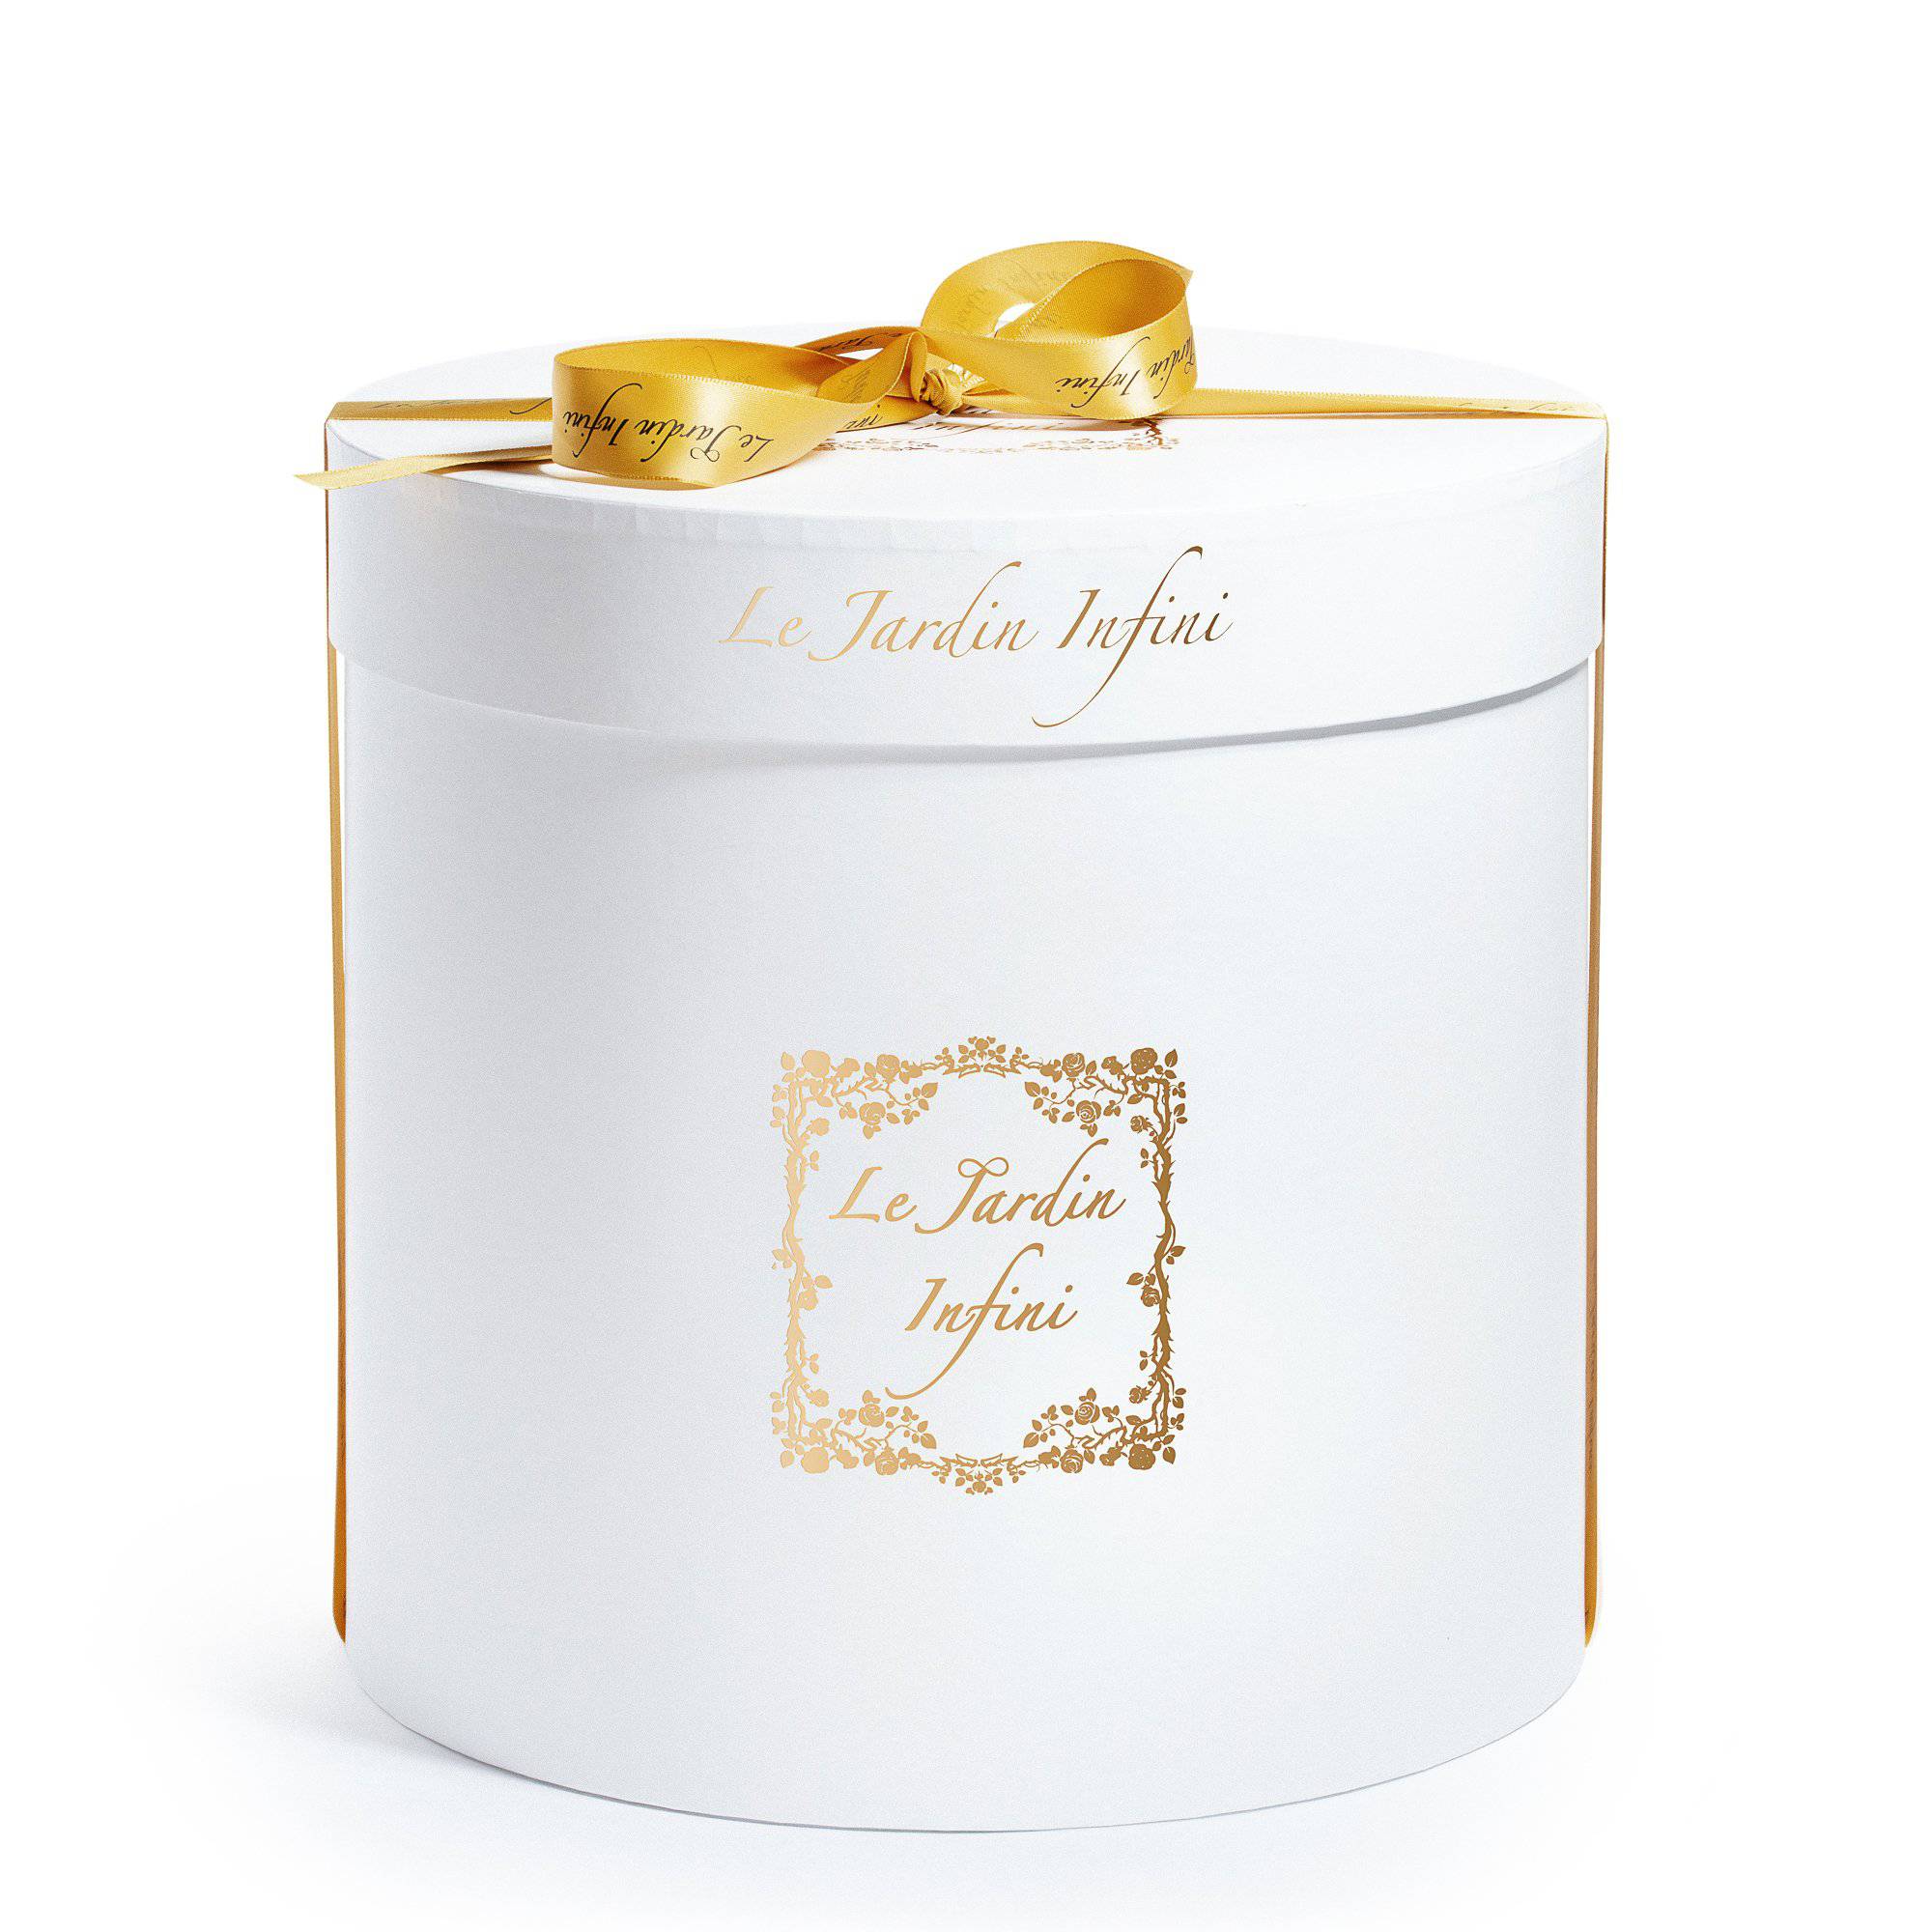 Matte Black Preserved Roses - Large Round White Box - Le Jardin Infini Roses in a Box